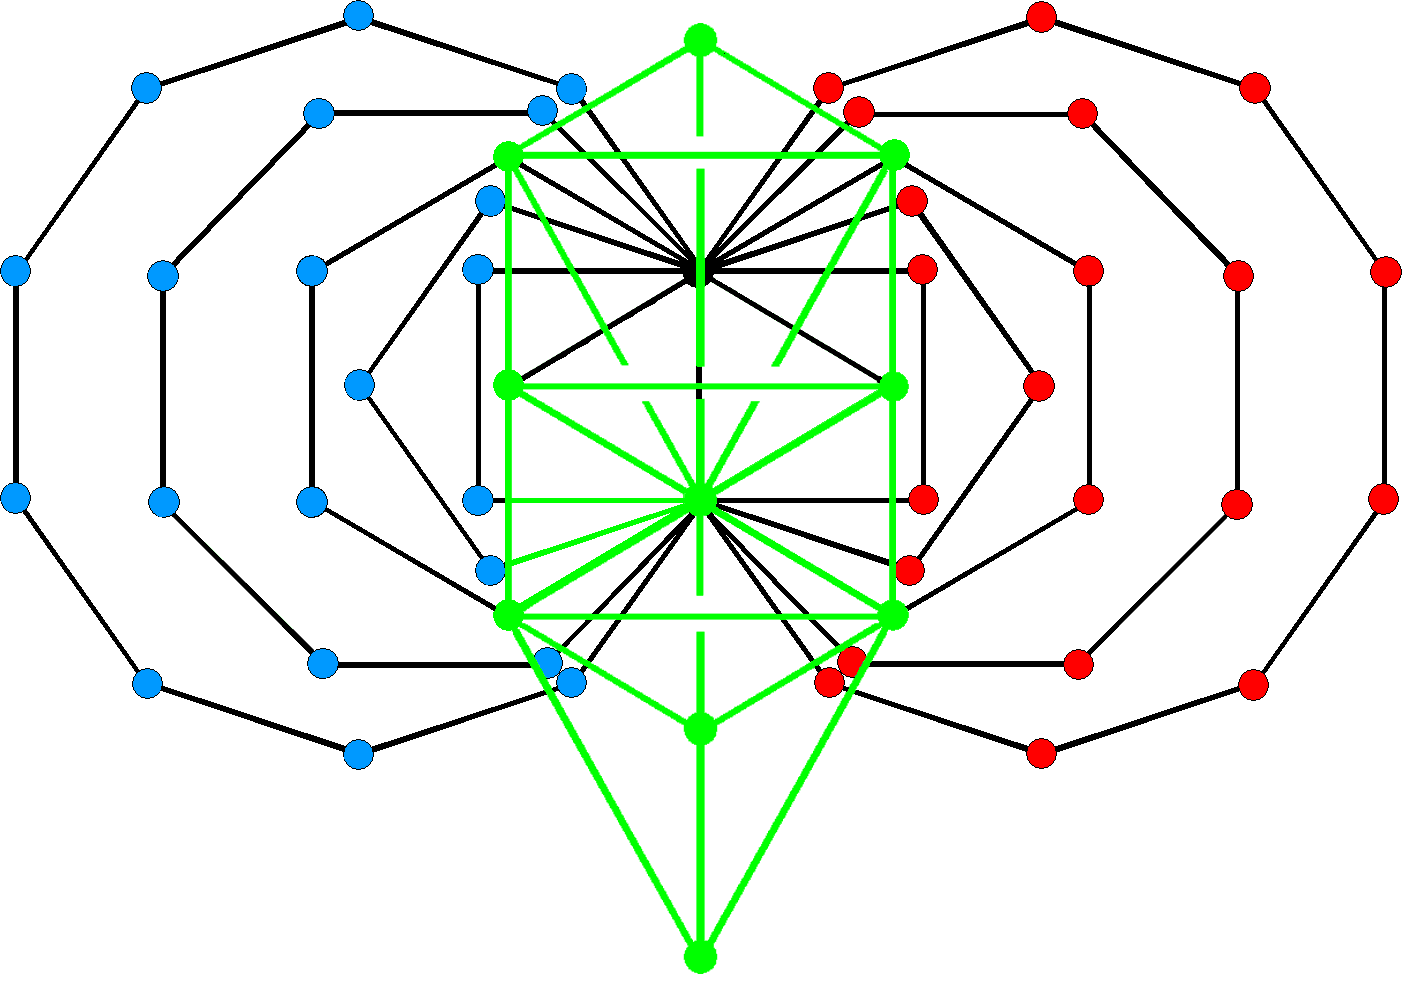 (21+21) intrinsic corners of 1st (6+6) enfolded polygons